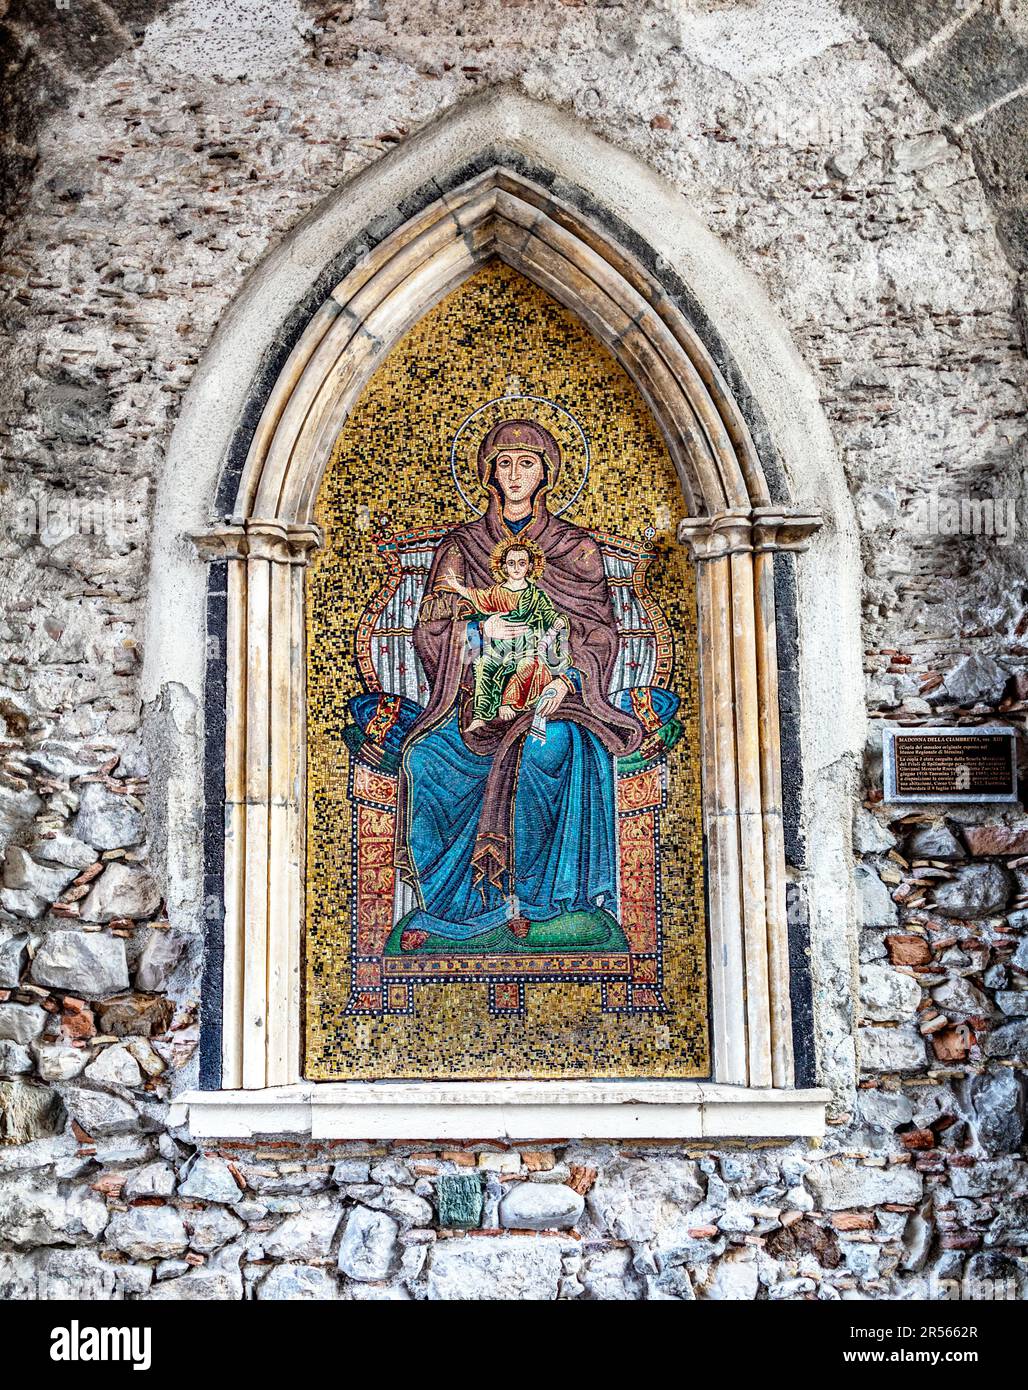 Mother Mary and Christ Mosaic in Taormina Sicily Stock Photo